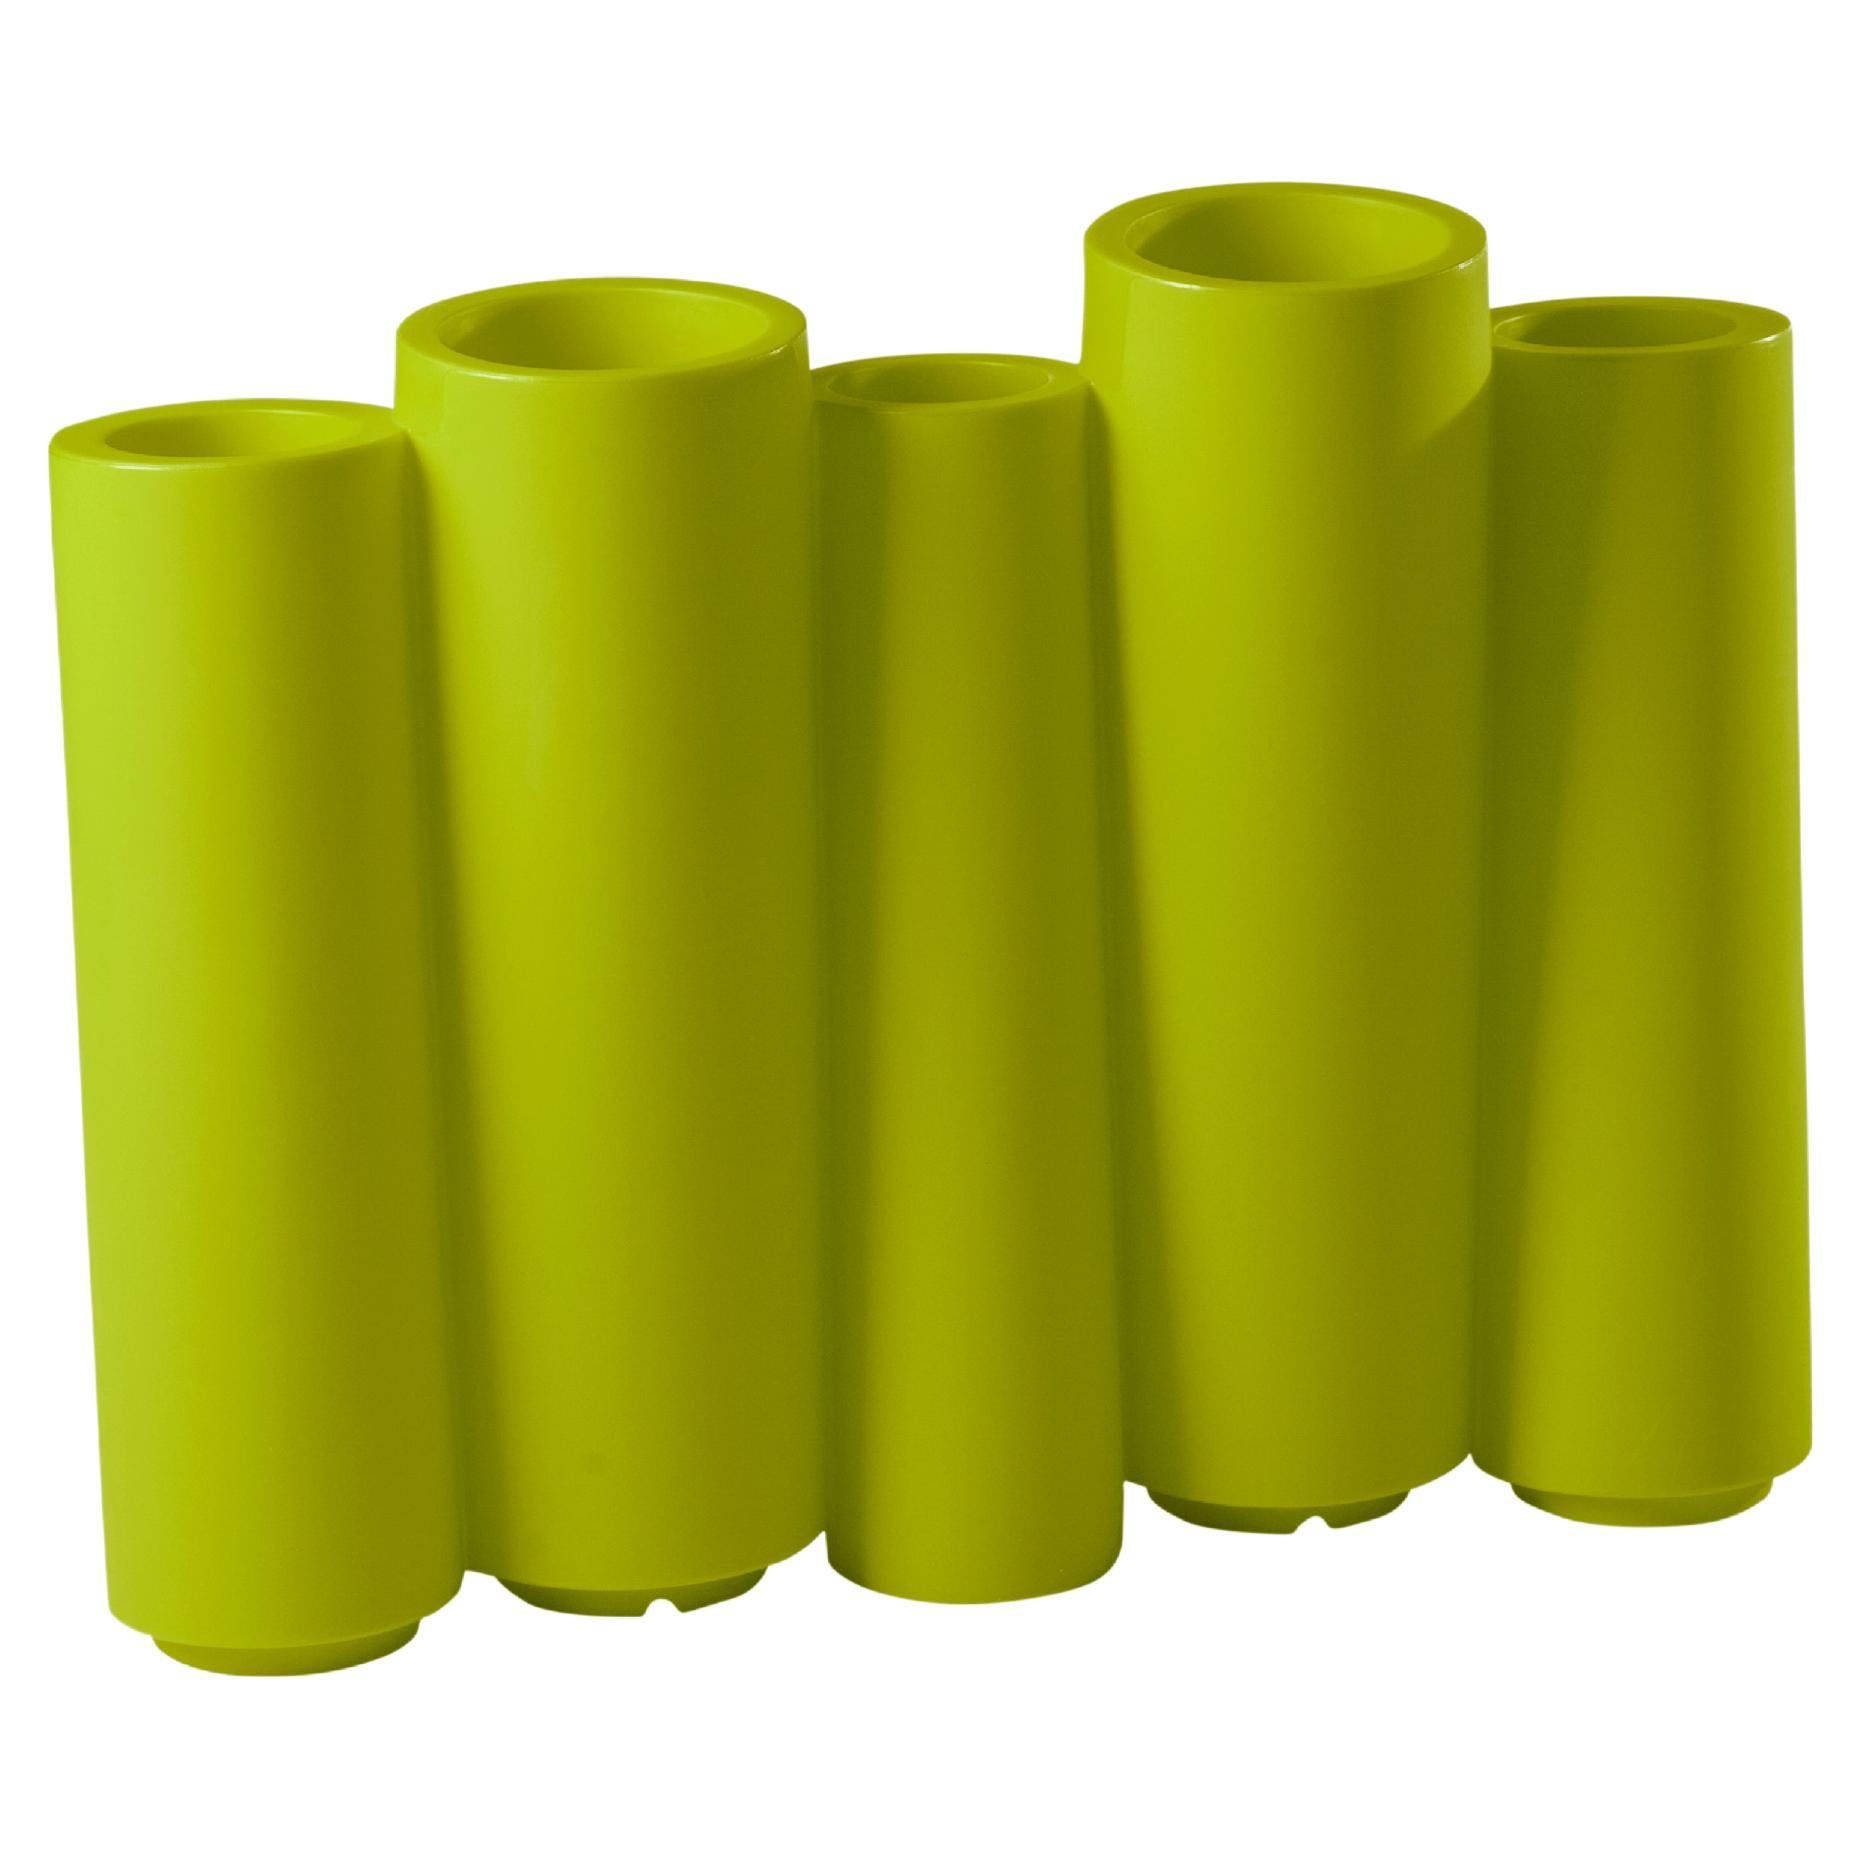 Slide Design Bamboo Cachepot in Lime Green by Tous Les Trois For Sale